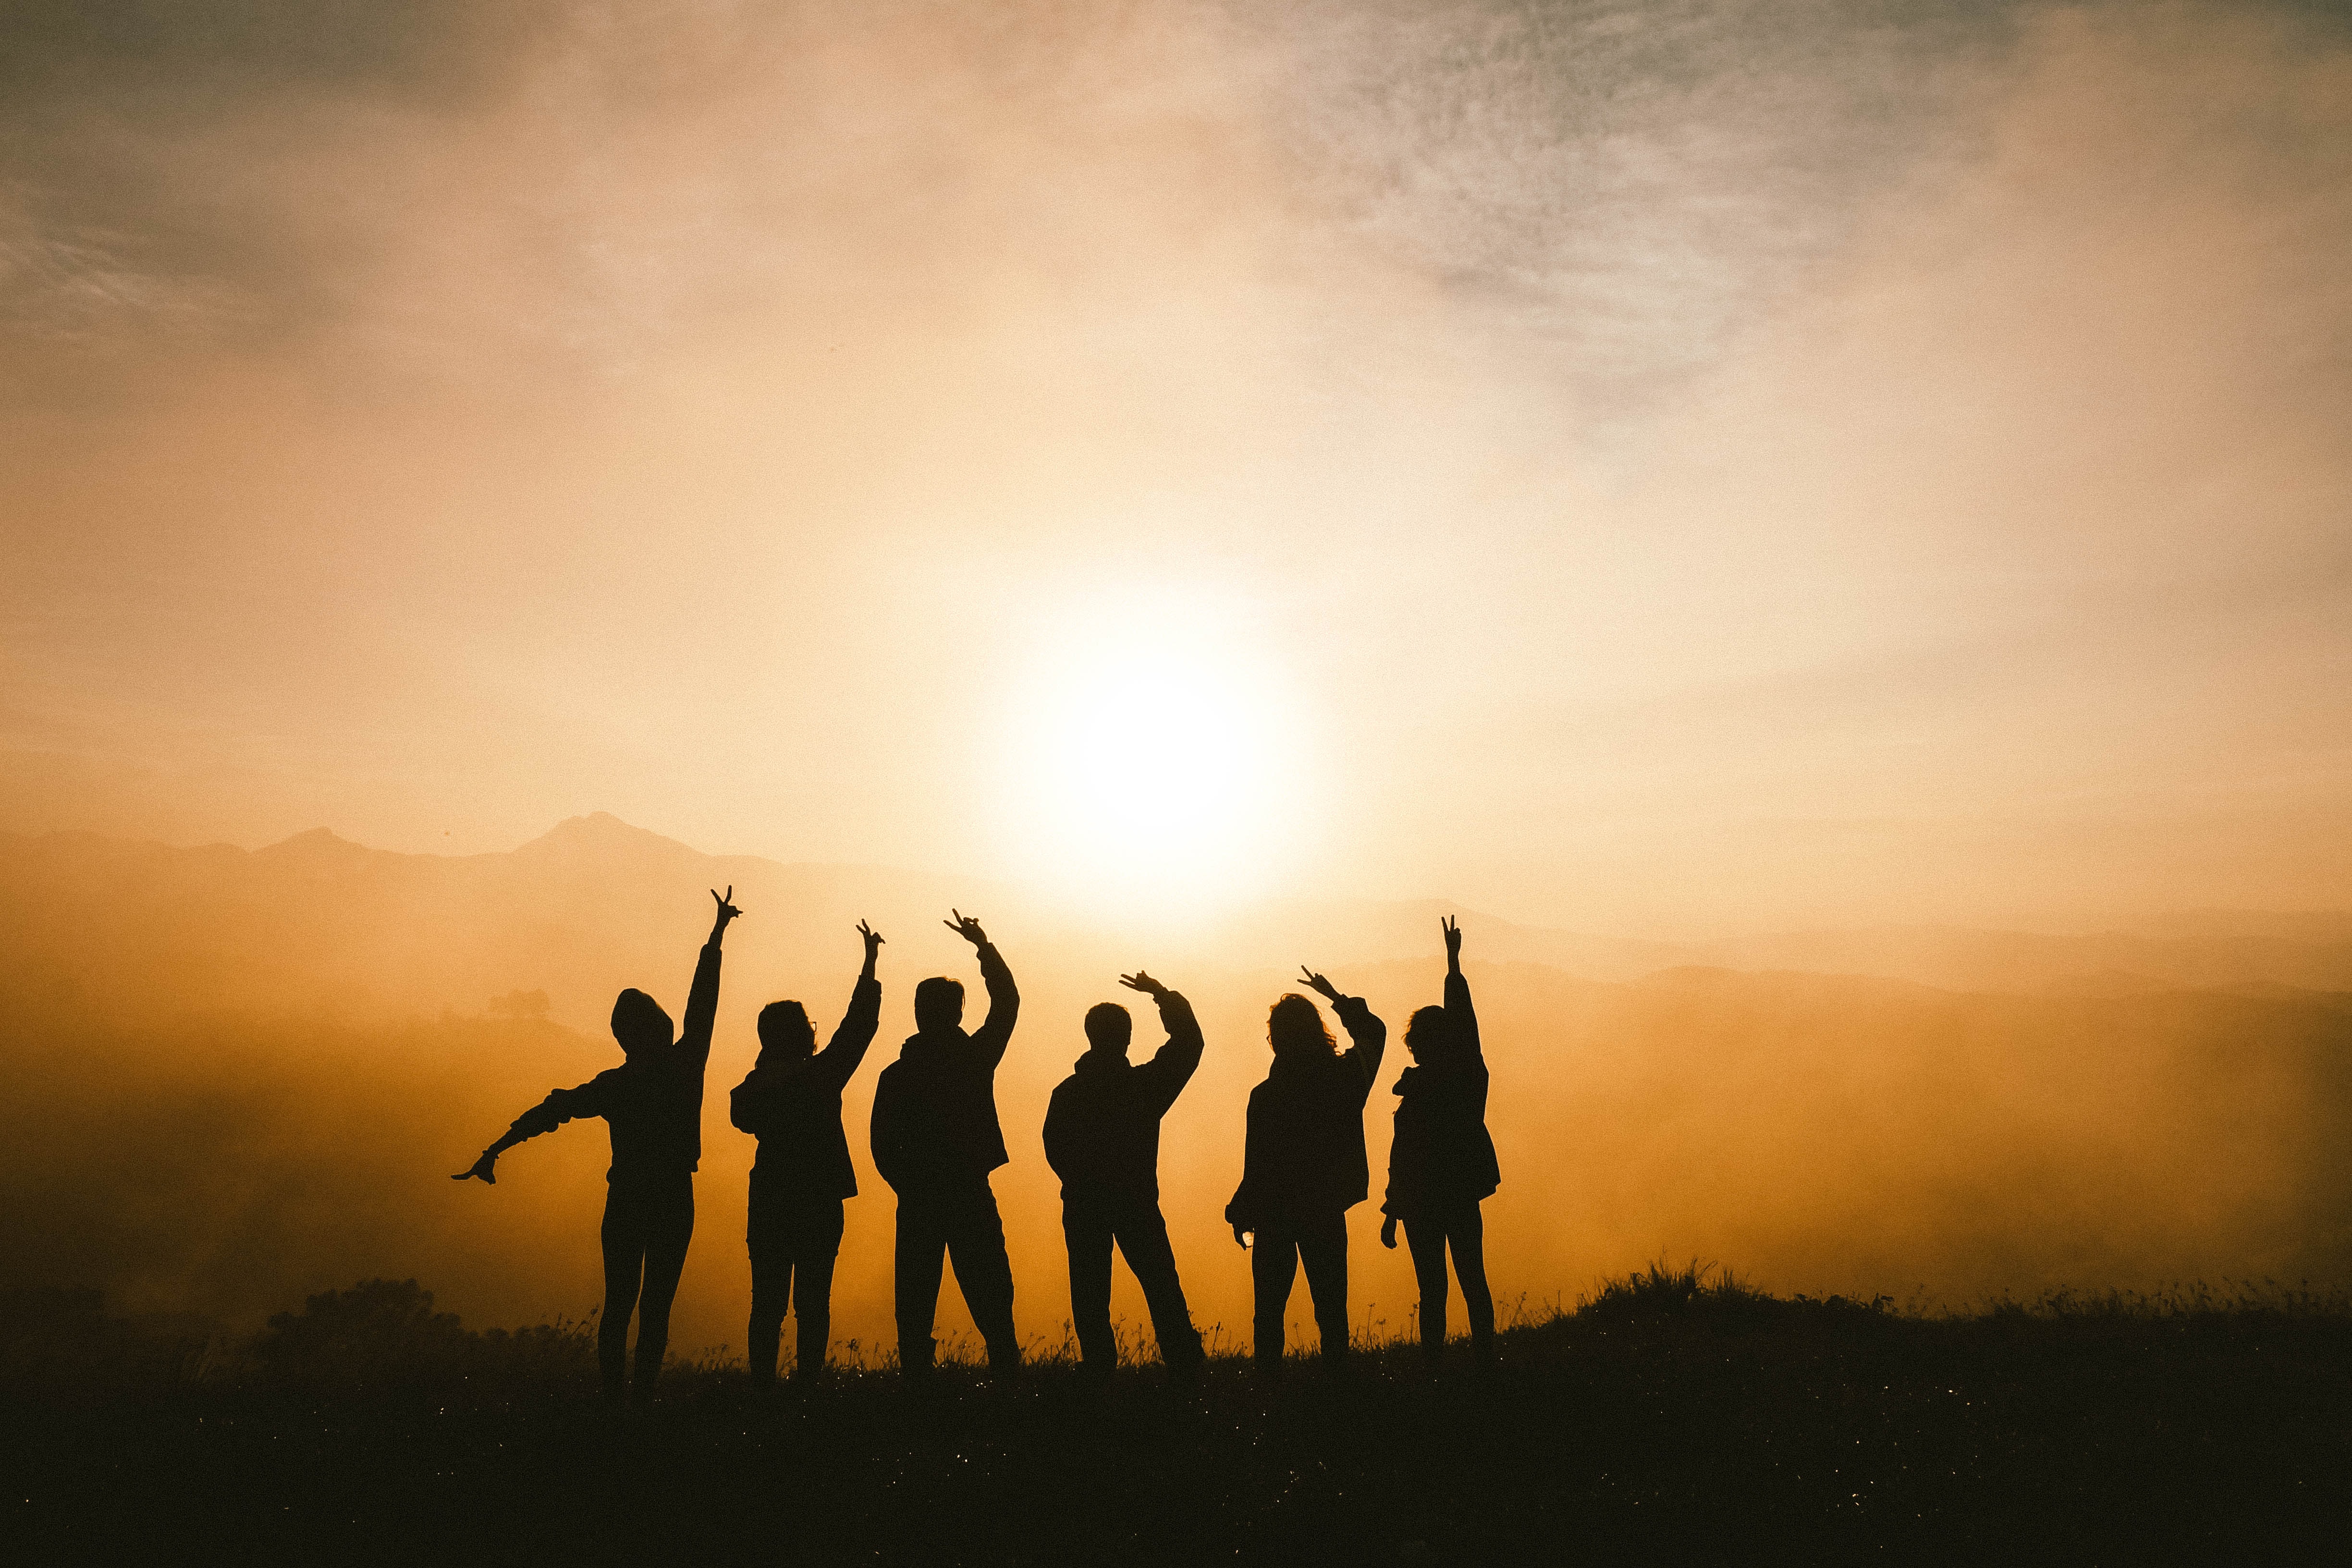 A breathtaking sunset view from the top of a mountain, with a group of people standing in silhouette.